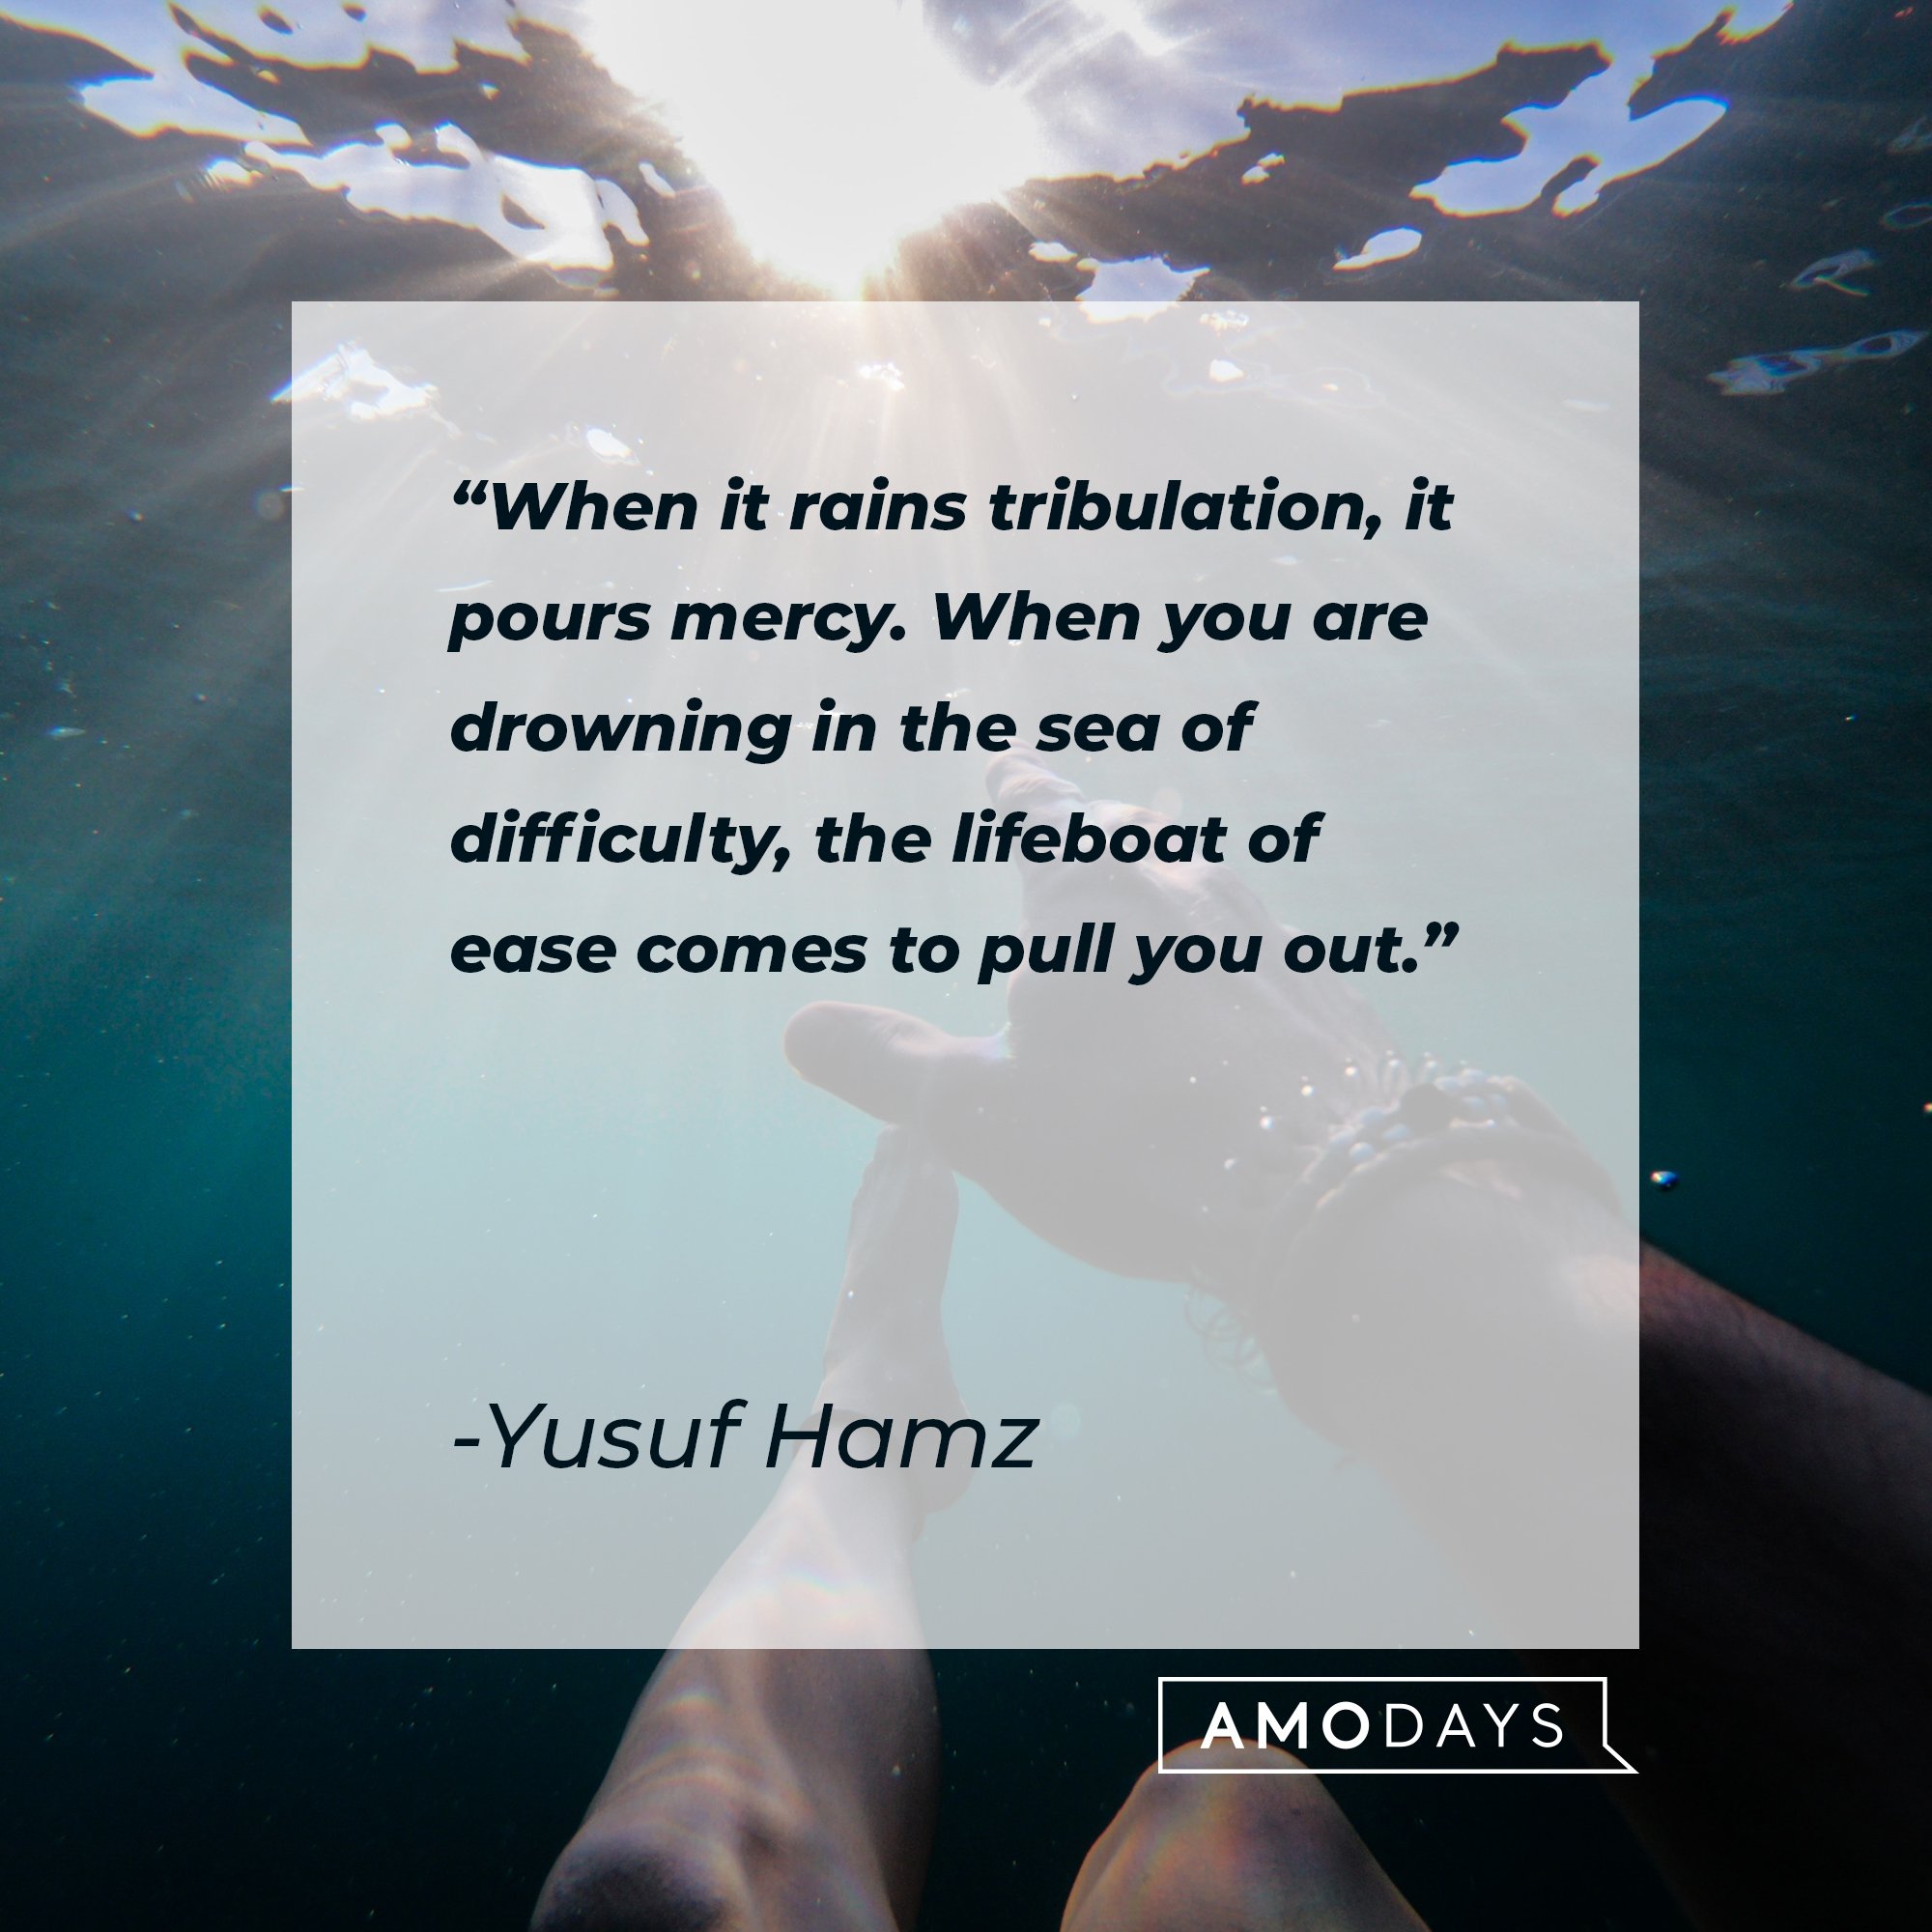 Yusuf Hamz’ quote: "When it rains tribulation, it pours mercy. When you are drowning in the sea of difficulty, the lifeboat of ease comes to pull you out." | Image: AmoDays